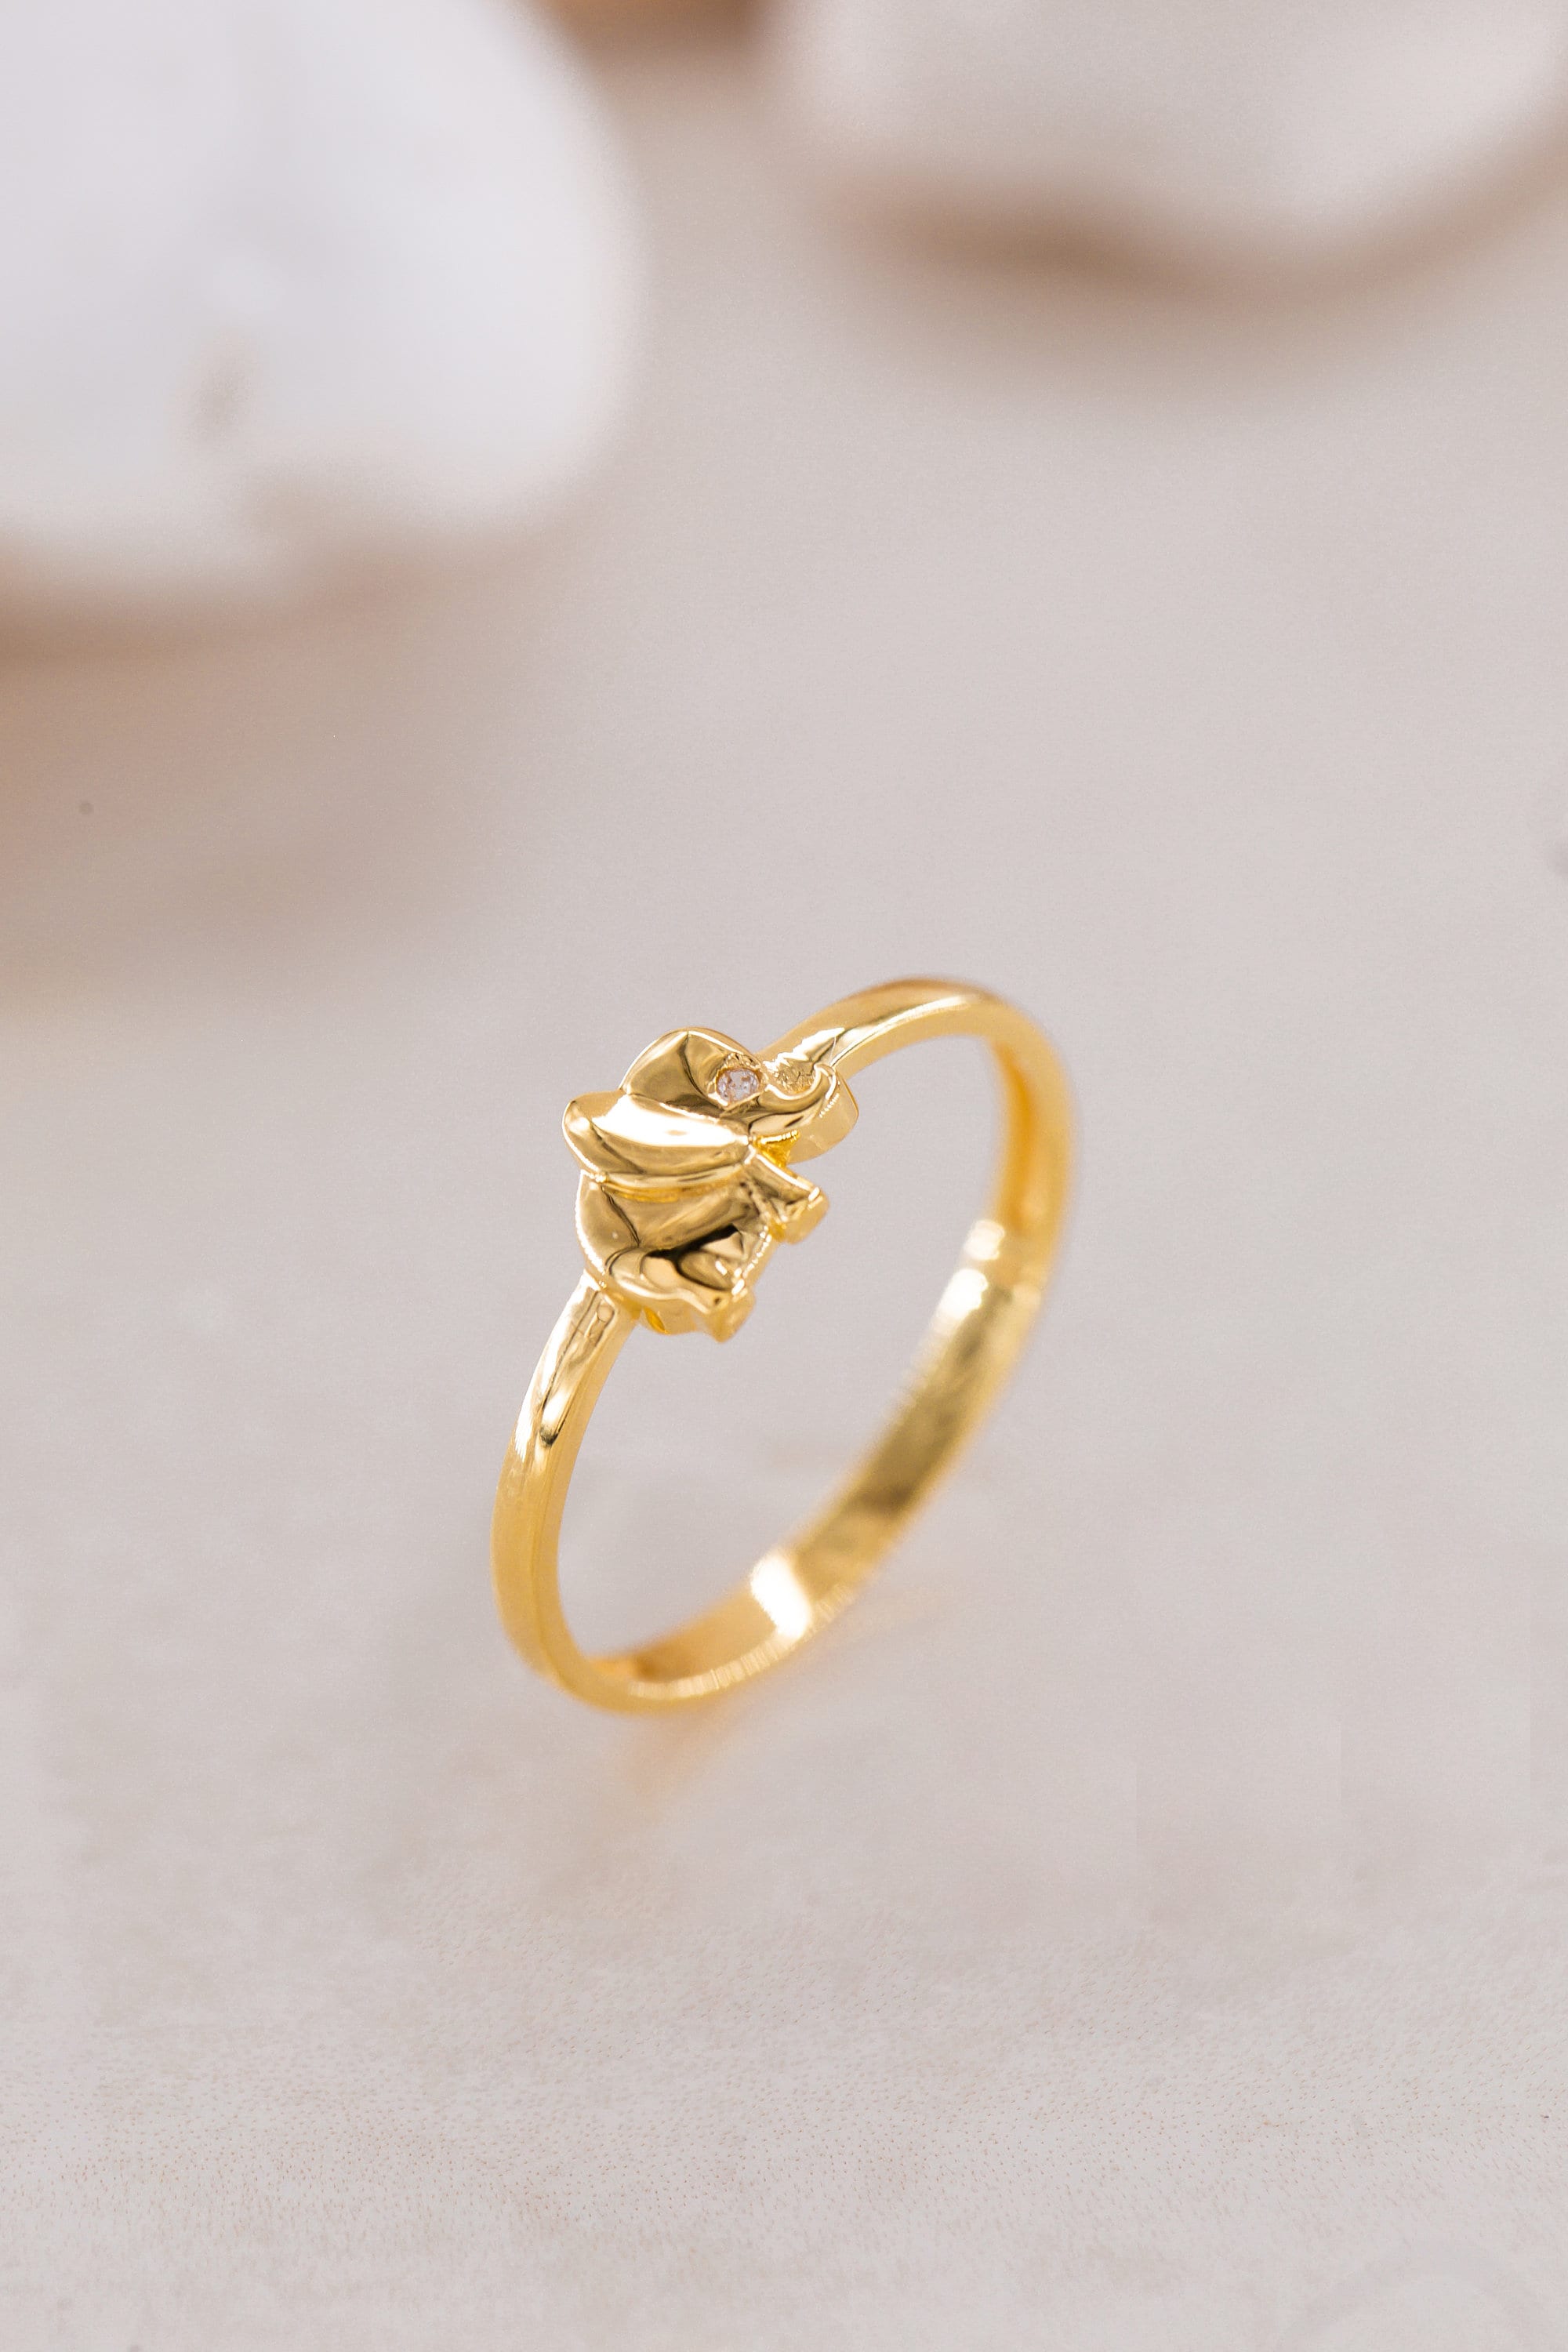 14K Golden Elephant Ring / Golden Ring / Engagement Ring / Gift For Mother Day / Mother Day Jewelry / Elephant Design Ring / Special Ring